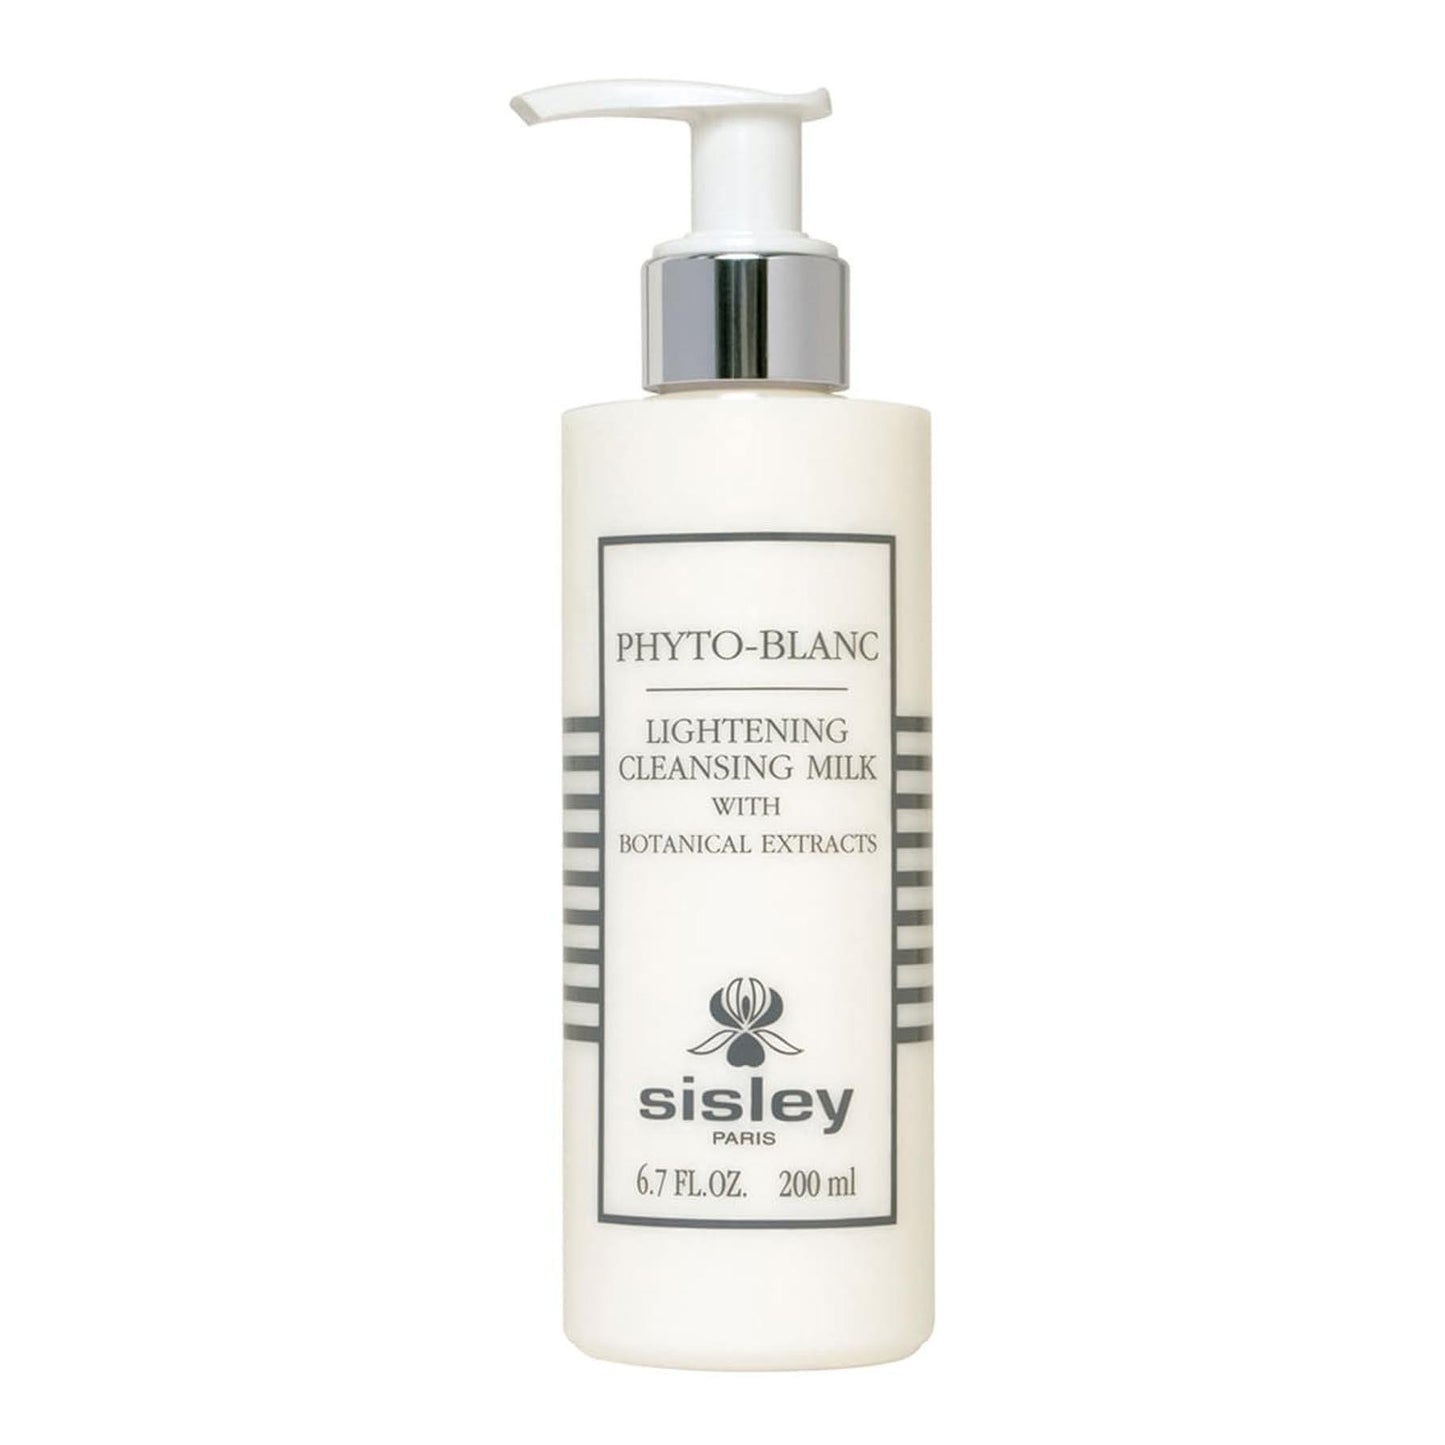 Phyto-Blanc Lightening Cleansing Milk - Cosmos Boutique New Jersey